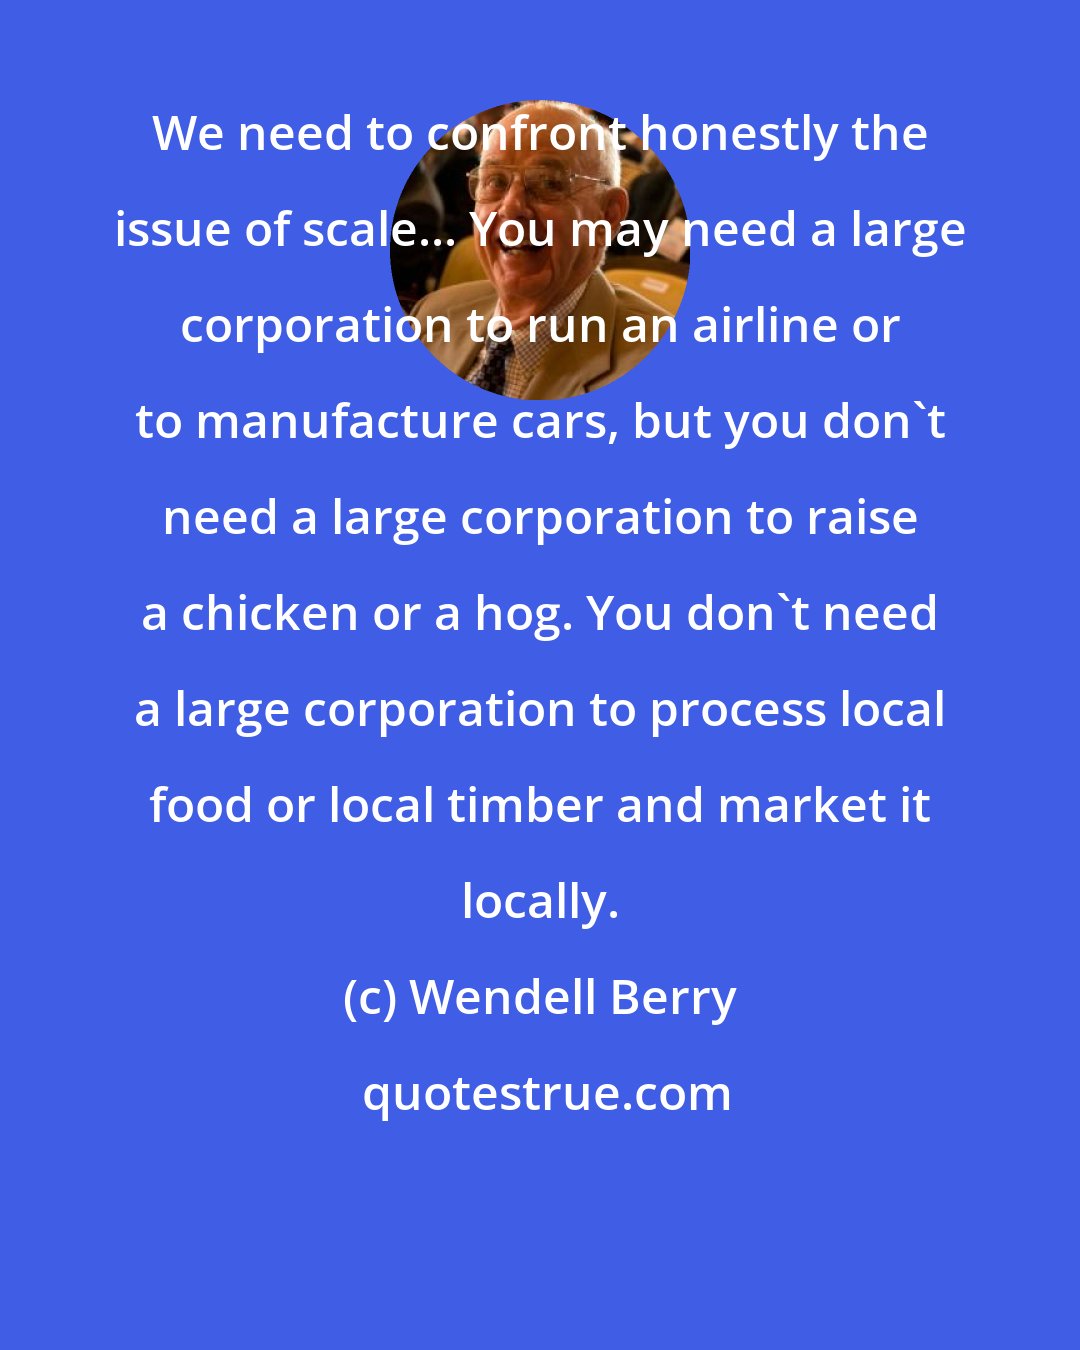 Wendell Berry: We need to confront honestly the issue of scale... You may need a large corporation to run an airline or to manufacture cars, but you don't need a large corporation to raise a chicken or a hog. You don't need a large corporation to process local food or local timber and market it locally.